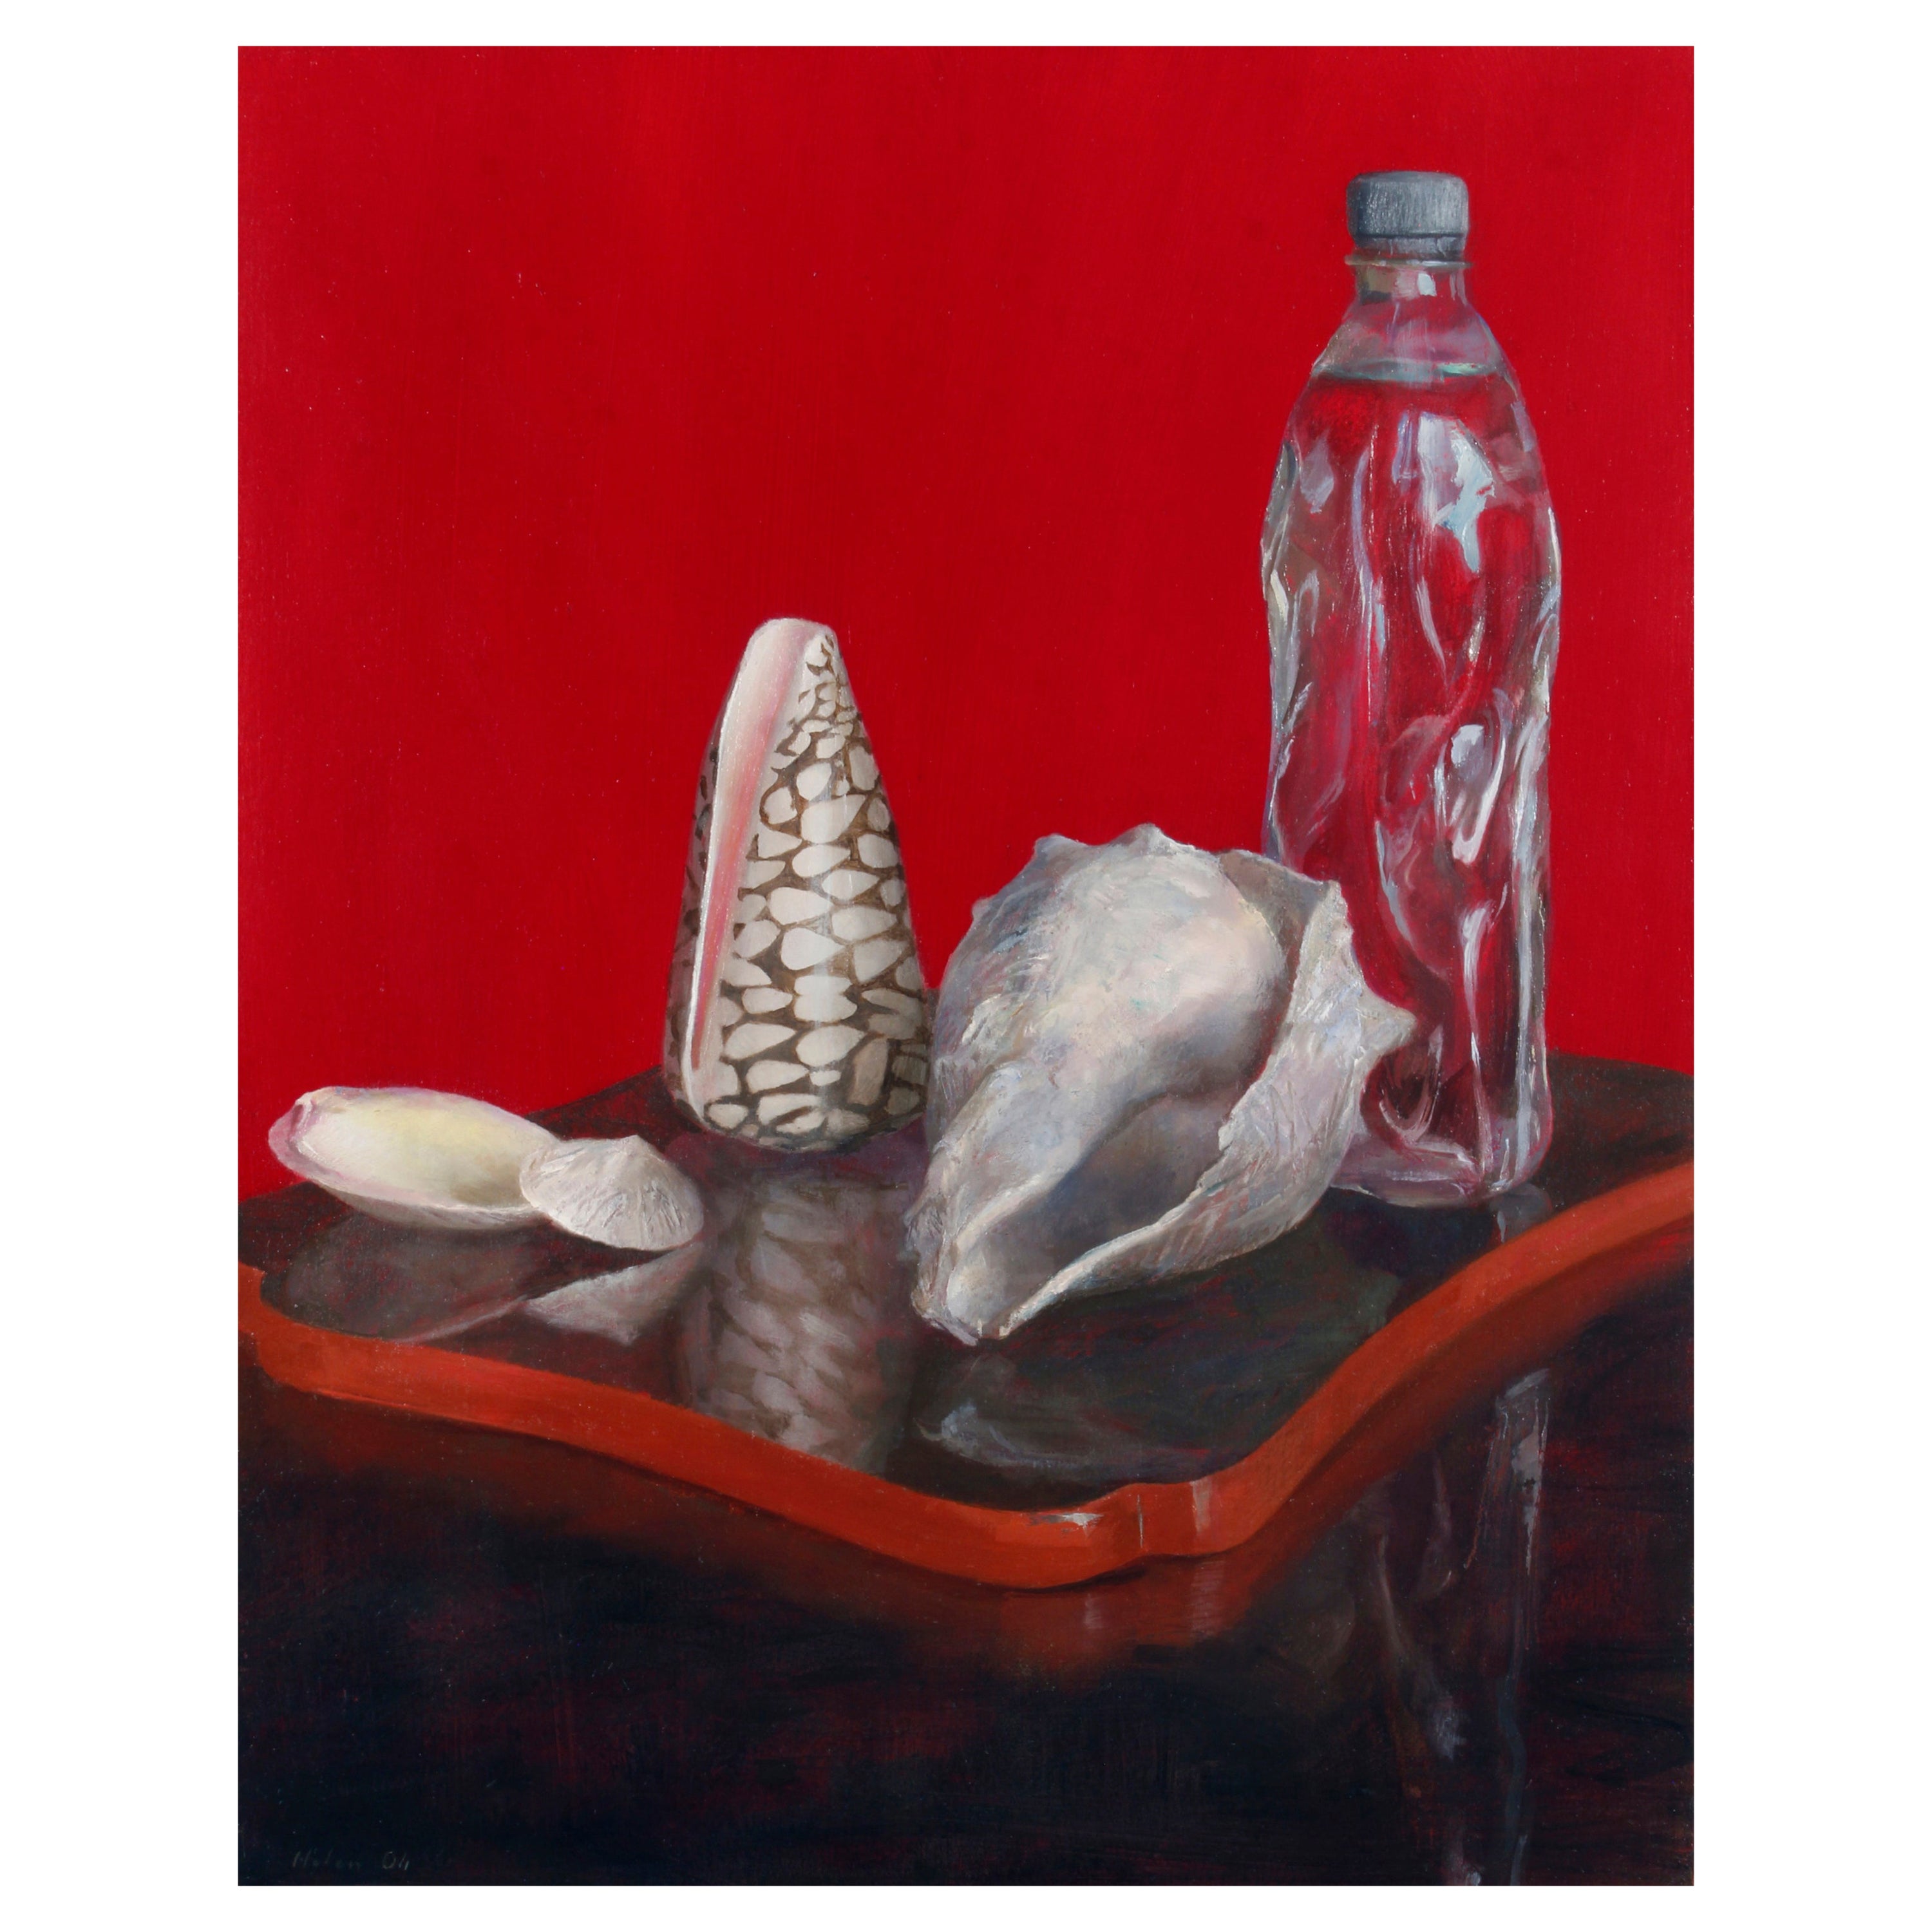 Sea Shells & Water Bottle on Lacquer Tray, Oil on Panel, Still Life Painting